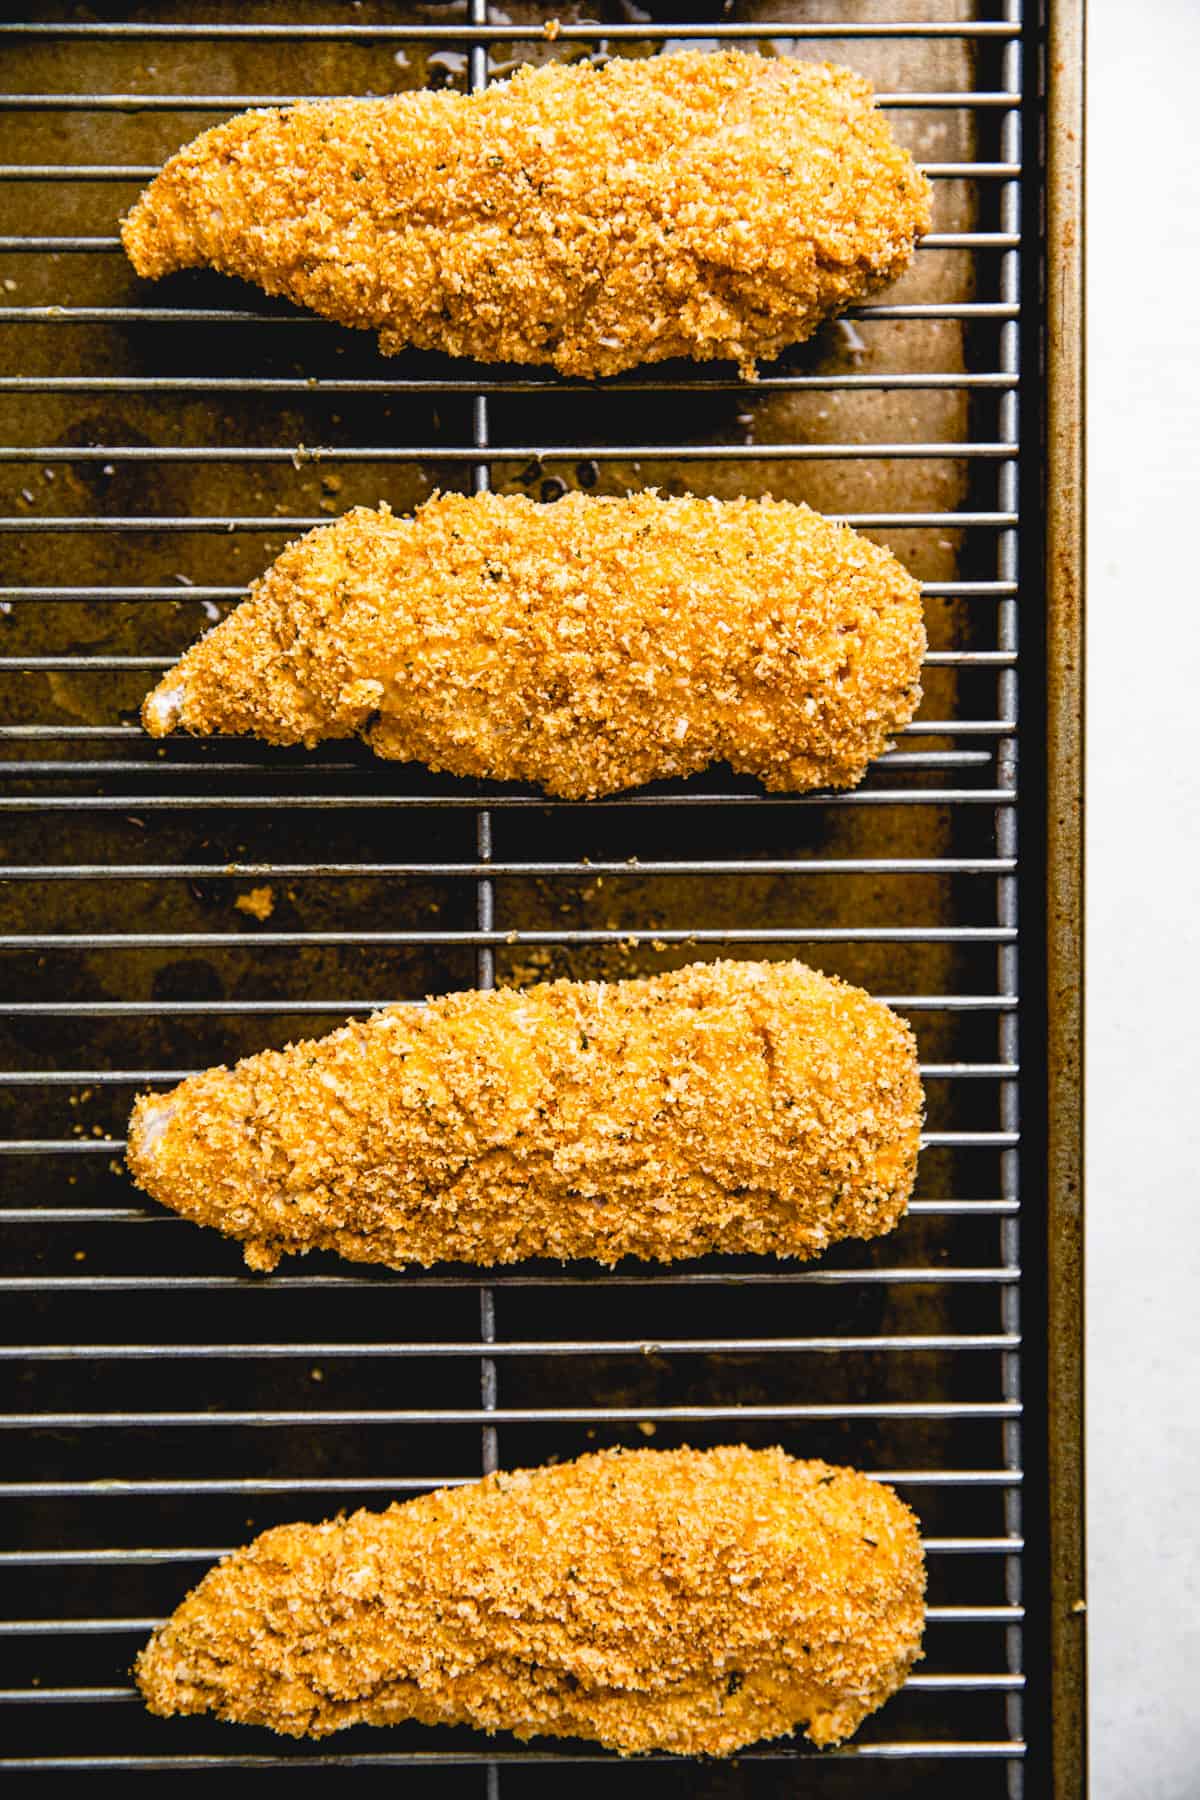 Chicken tenders, coated with breadcrumbs, on a baking sheet with wire rack.